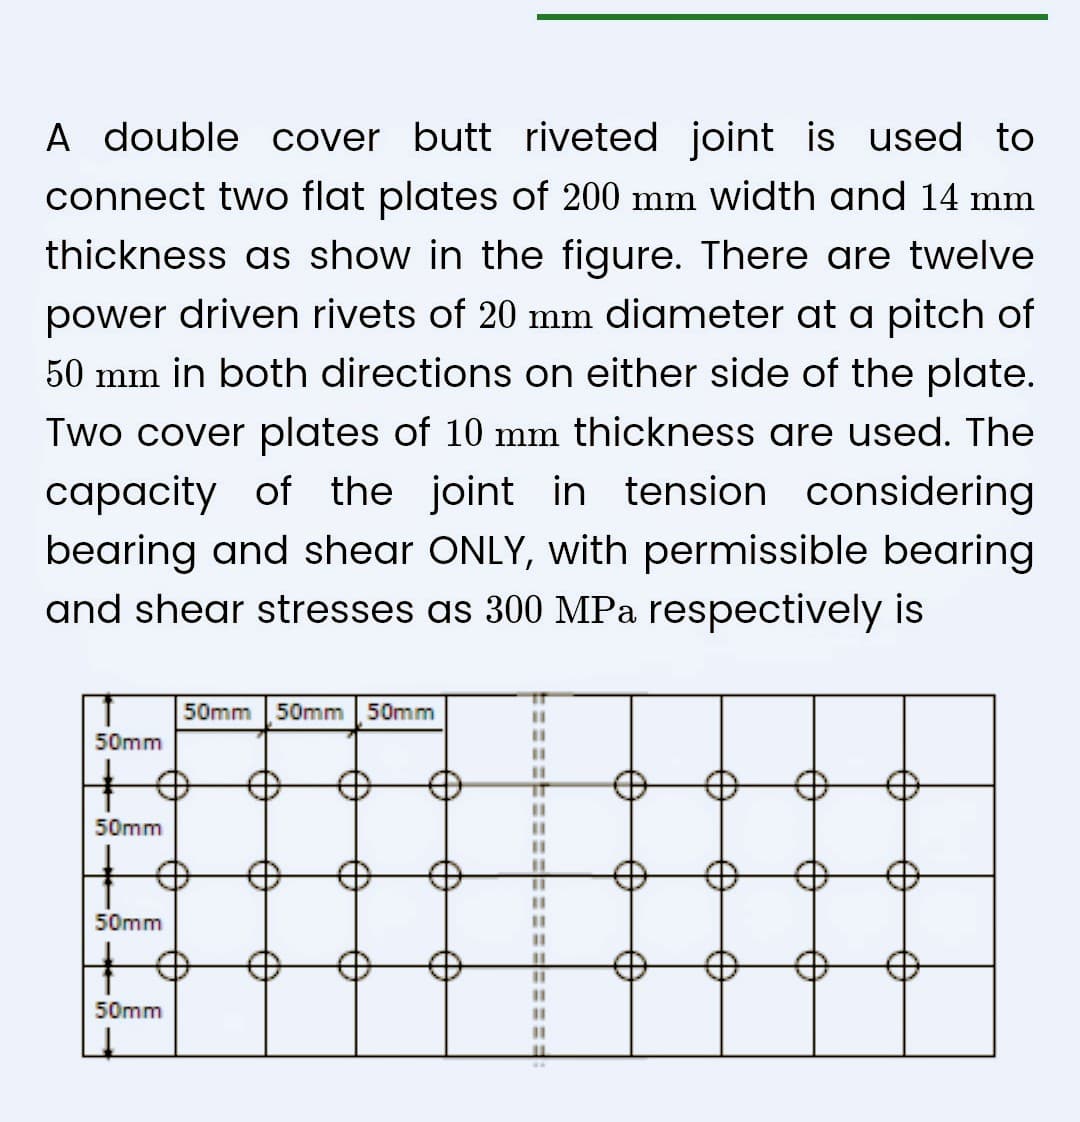 A double cover butt riveted joint is used to
connect two flat plates of 200 mm width and 14 mm
thickness as show in the figure. There are twelve
power driven rivets of 20 mm diameter at a pitch of
50 mm in both directions on either side of the plate.
Two cover plates of 10 mm thickness are used. The
capacity of the joint in tension considering
bearing and shear ONLY, with permissible bearing
and shear stresses as 300 MPa respectively is
50mm
+
50mm
50mm
50mm
50mm 50mm 50mm
11
11
11
11
11
11
11
11
11
11
11